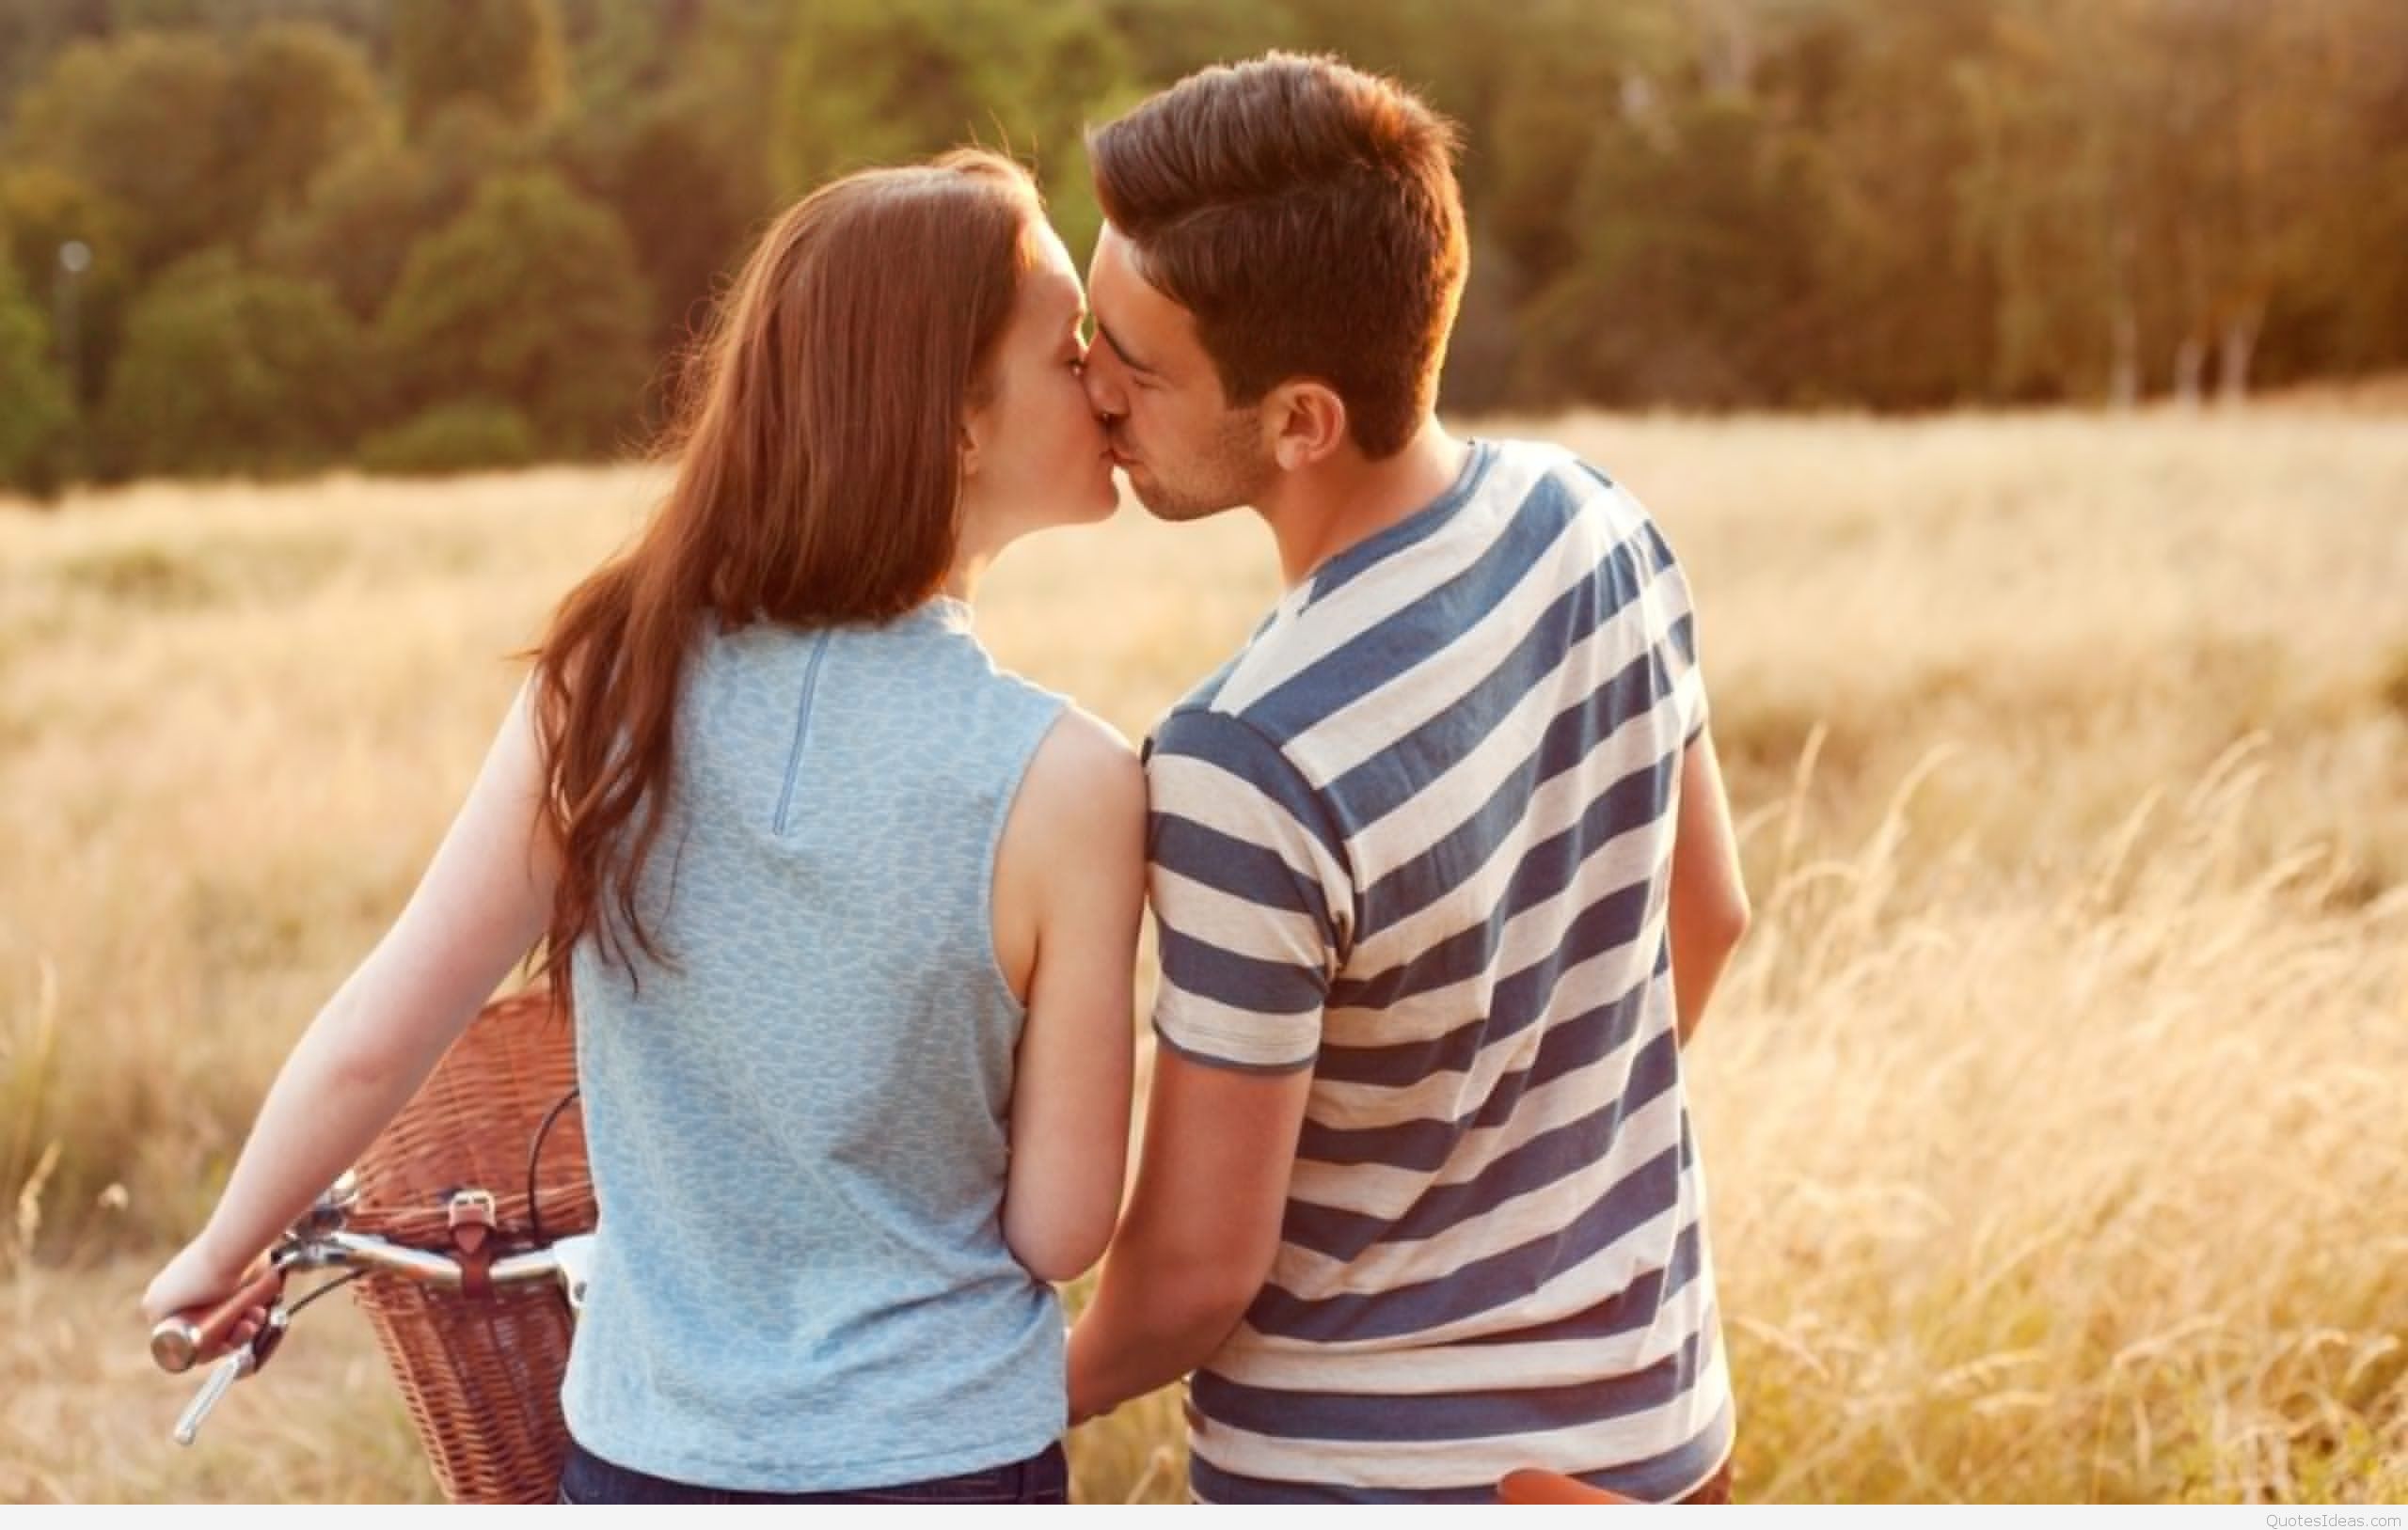 Couple Romantic Kissing Wallpapers.